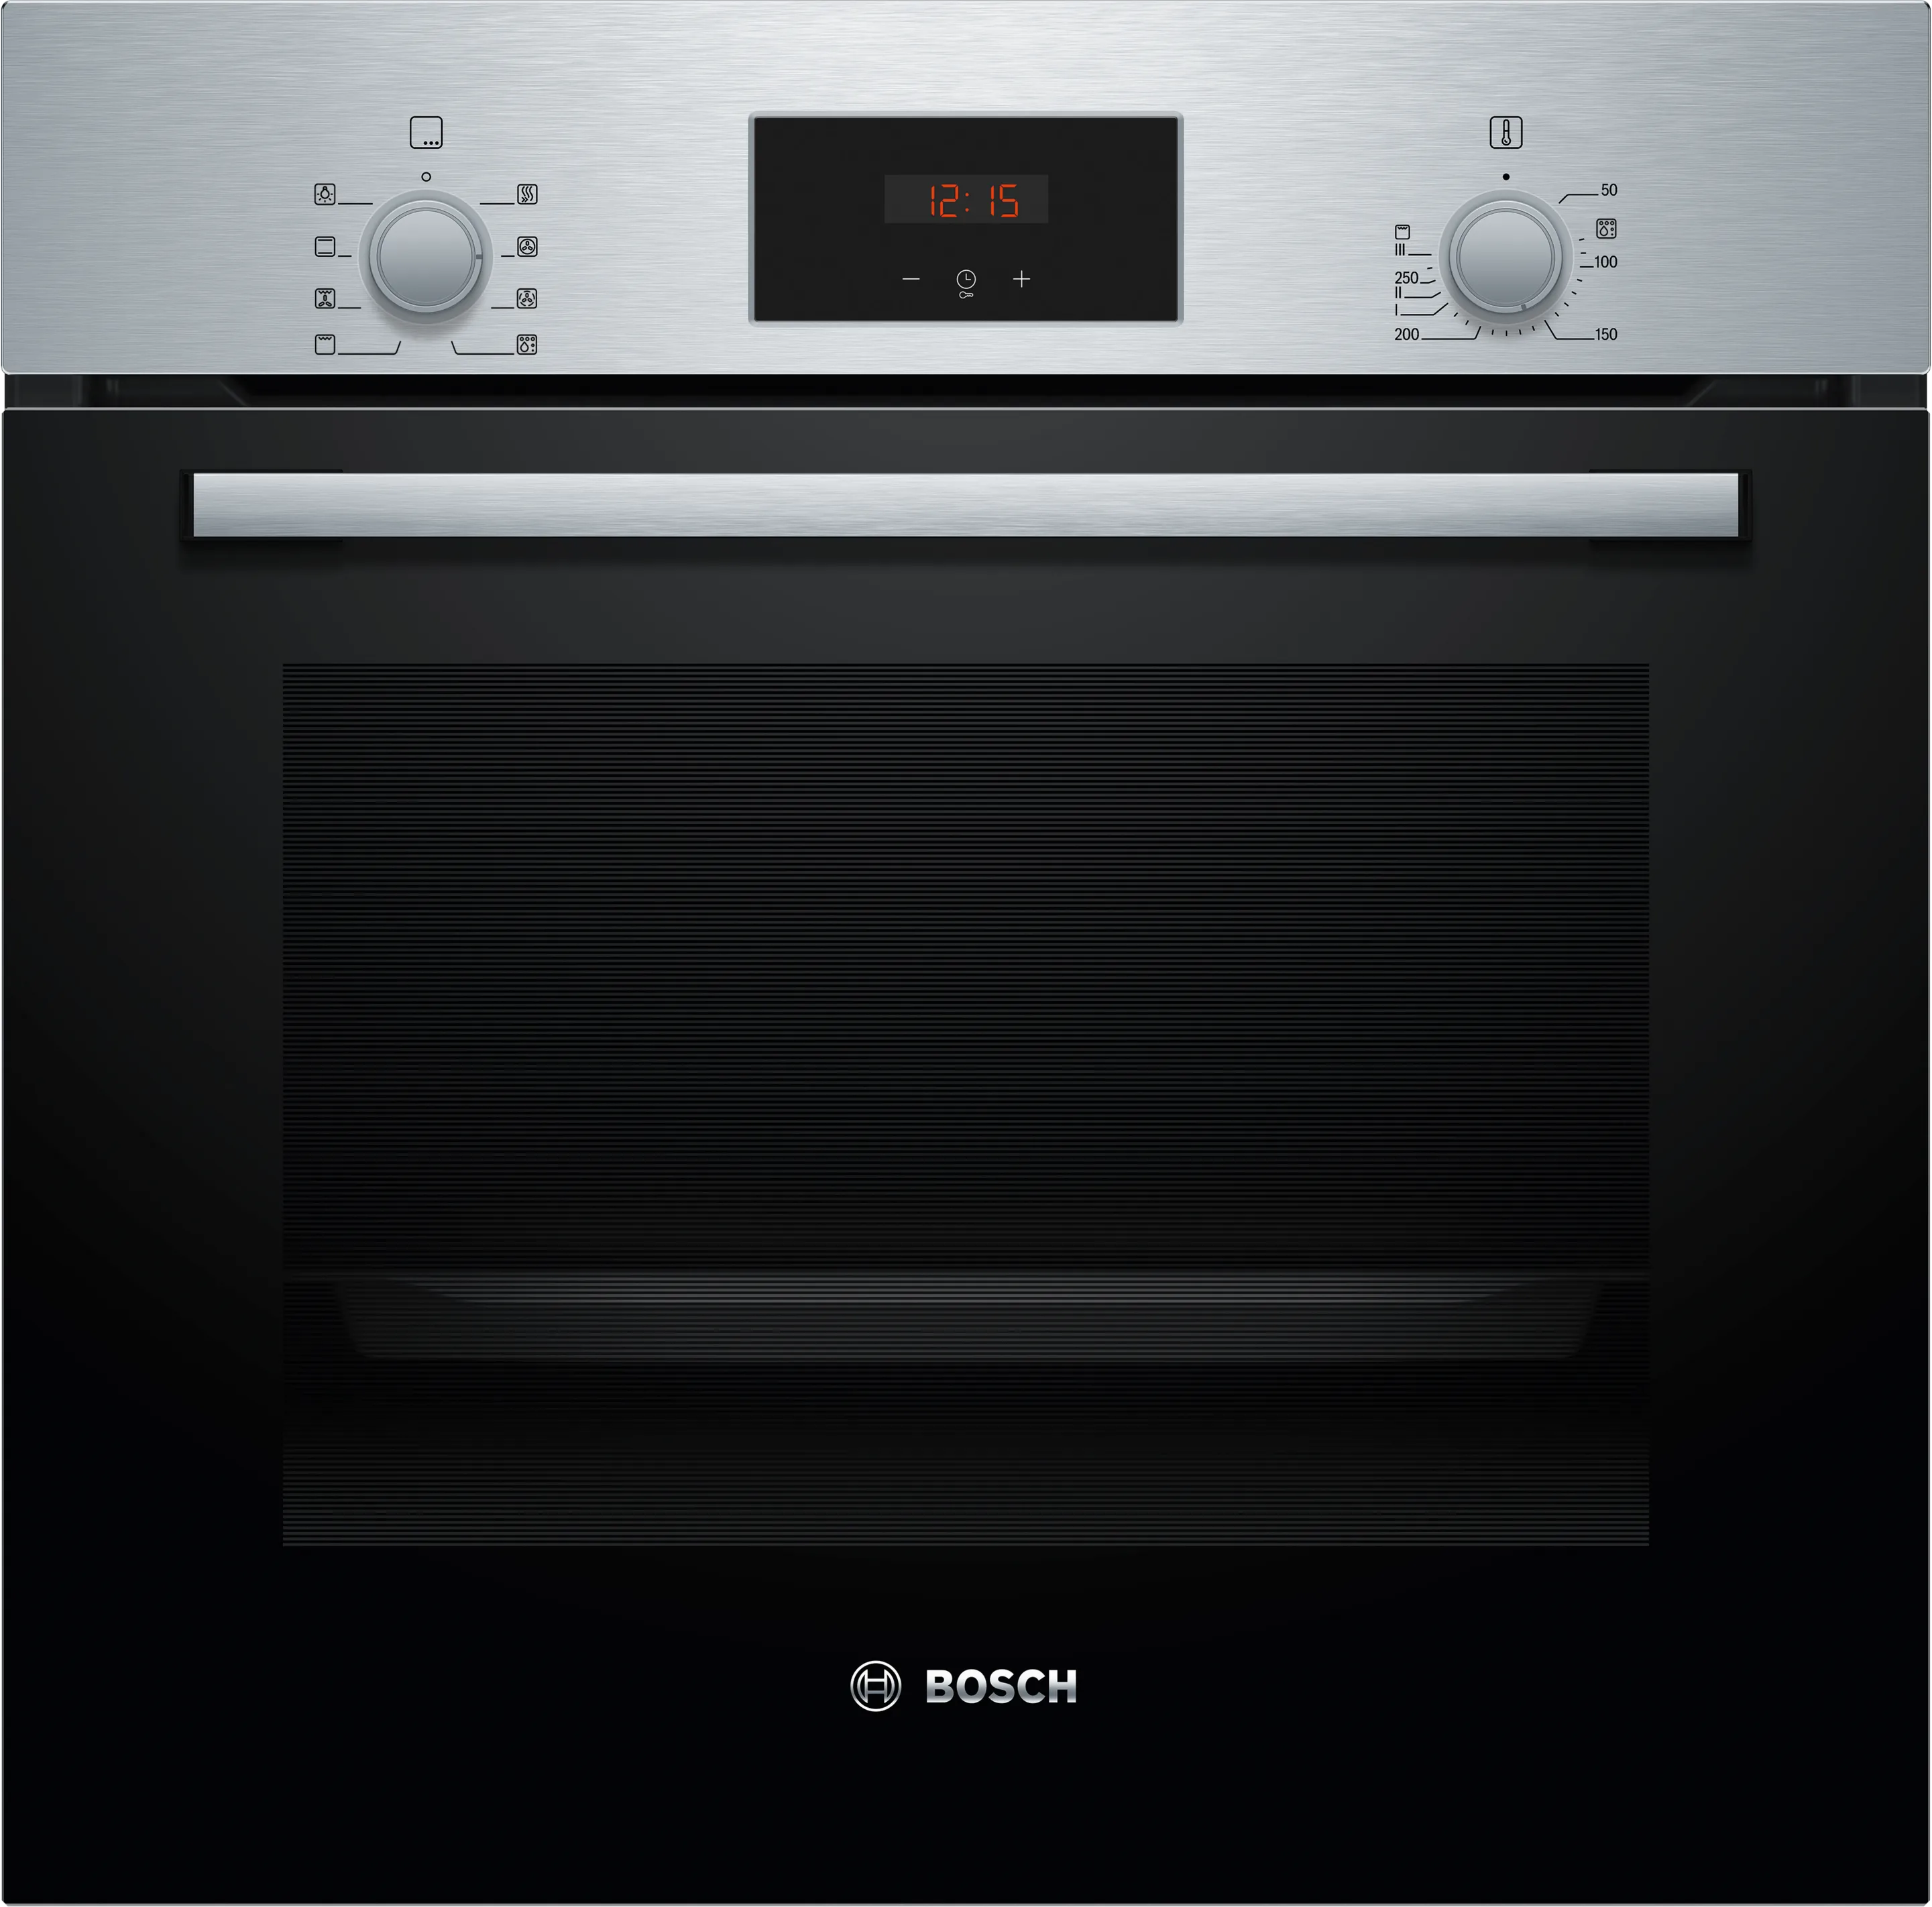 Series 2 Built-in oven 60 x 60 cm Stainless steel 